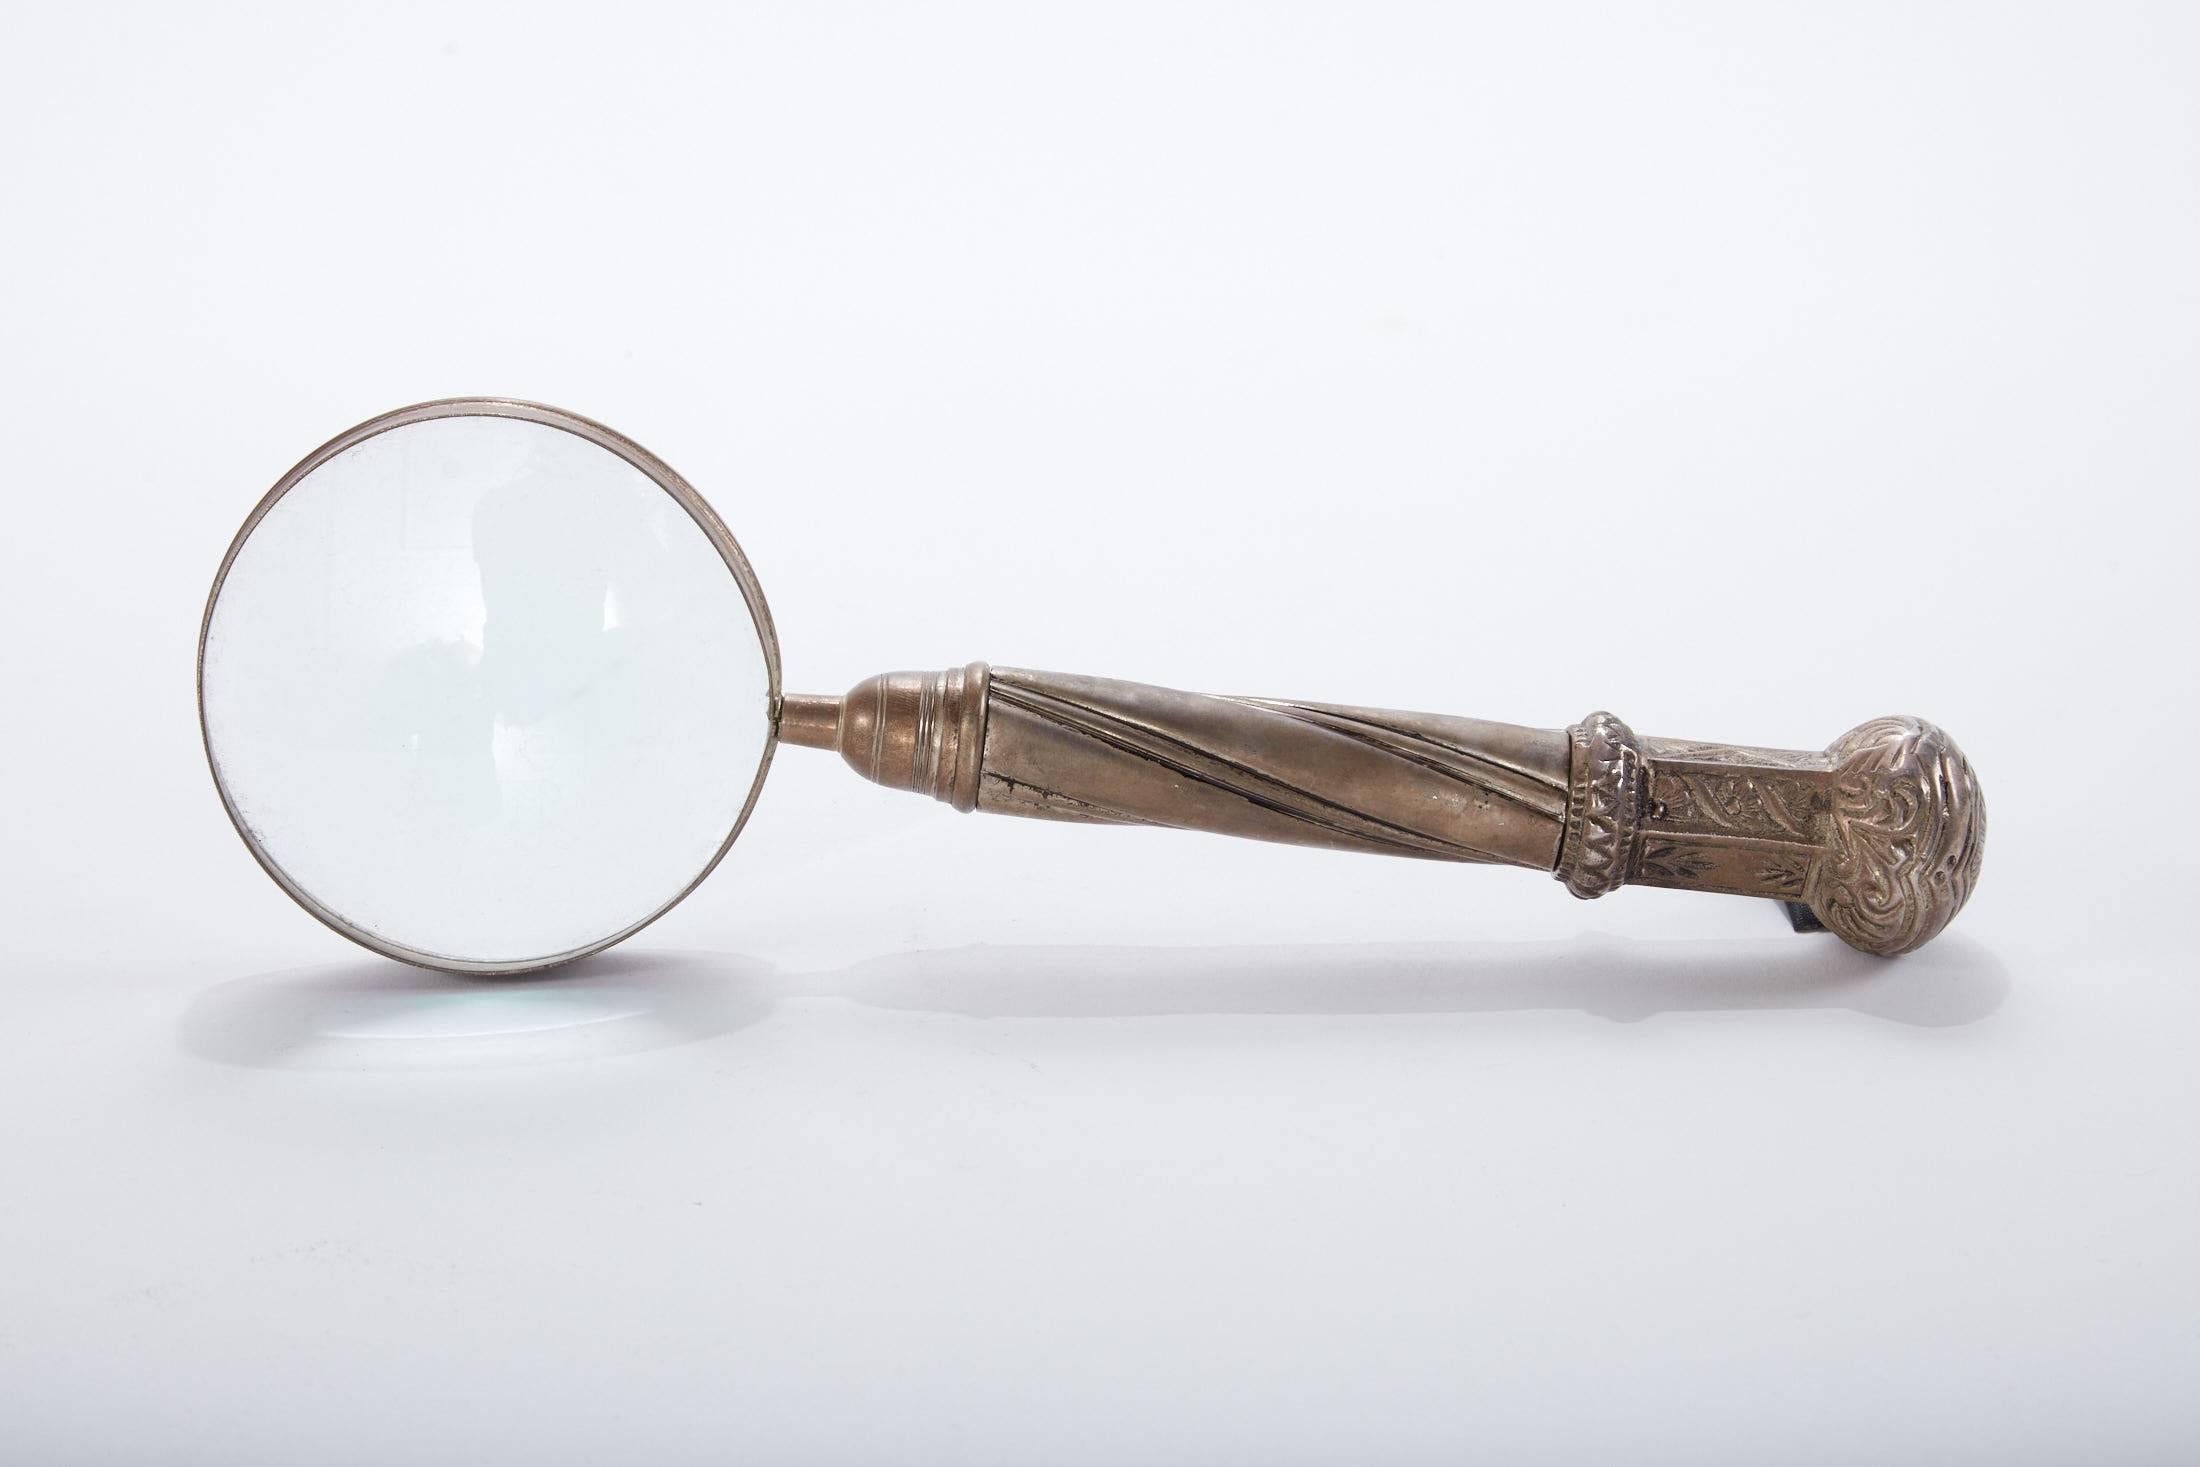 Early 20th century French magnifying glass with ornate pewter handle
Found in the South of France.